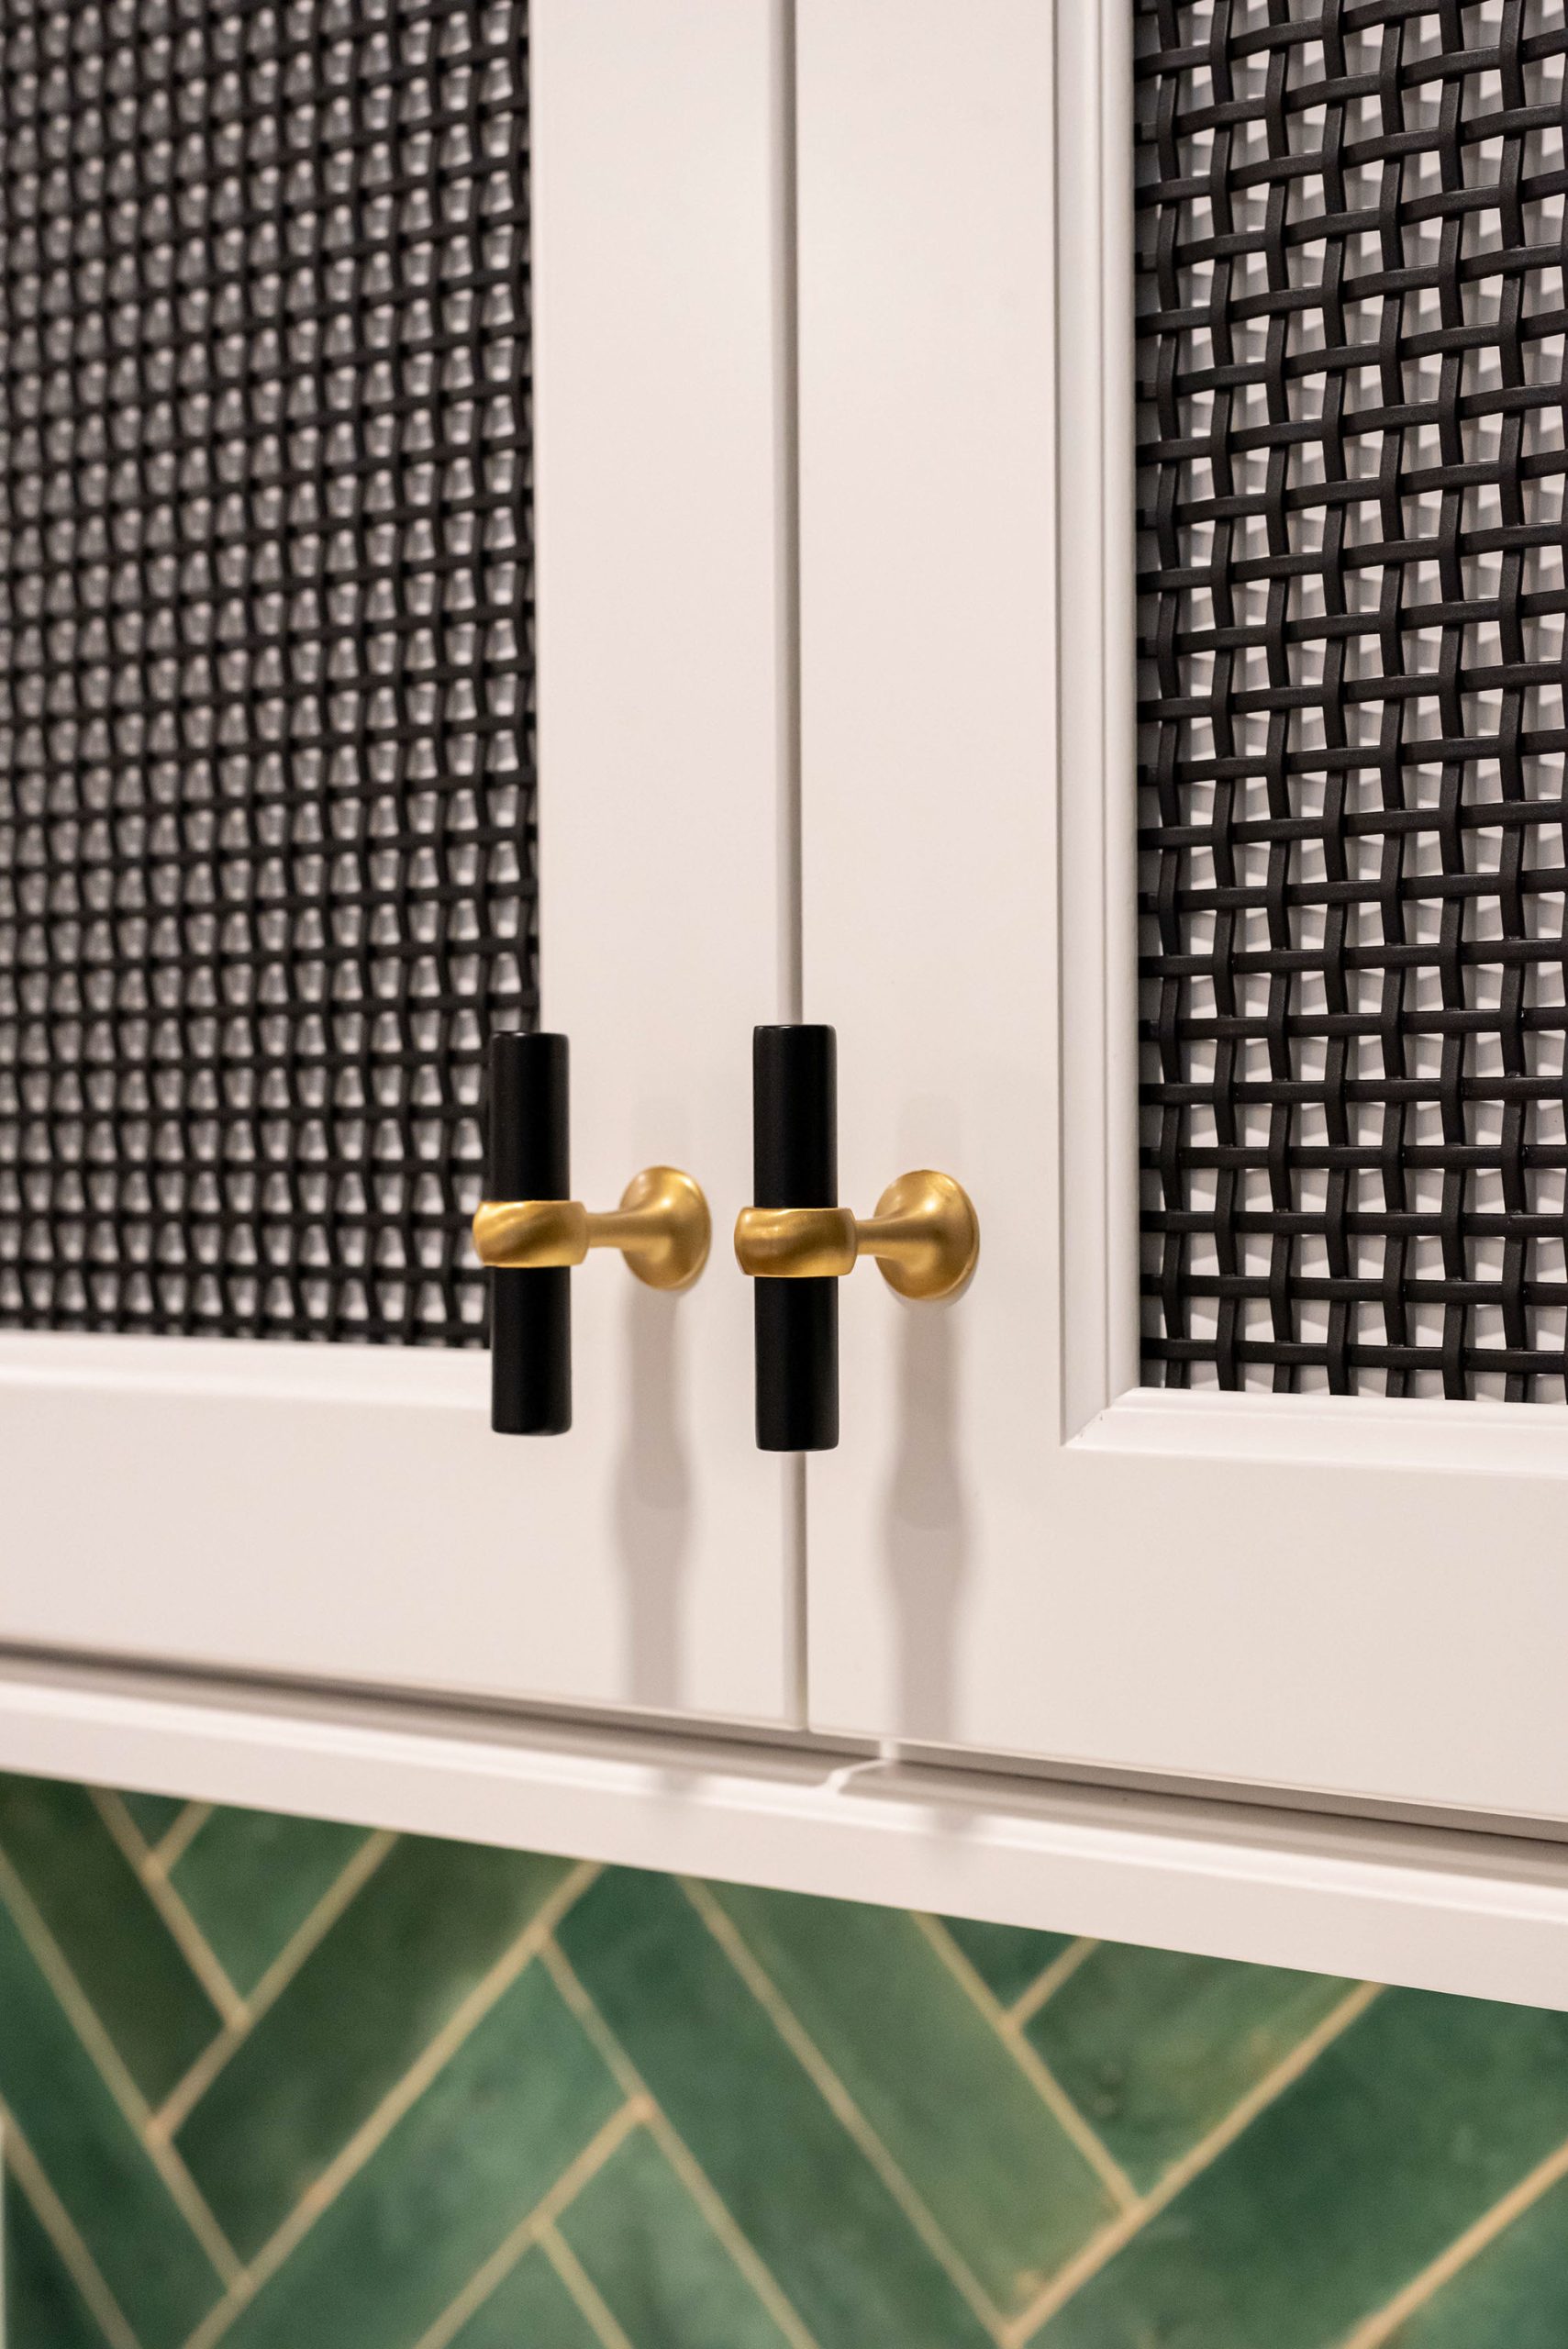 Black and gold cabinet handles provide the perfect accent colors to a dark and modern kitchen design.